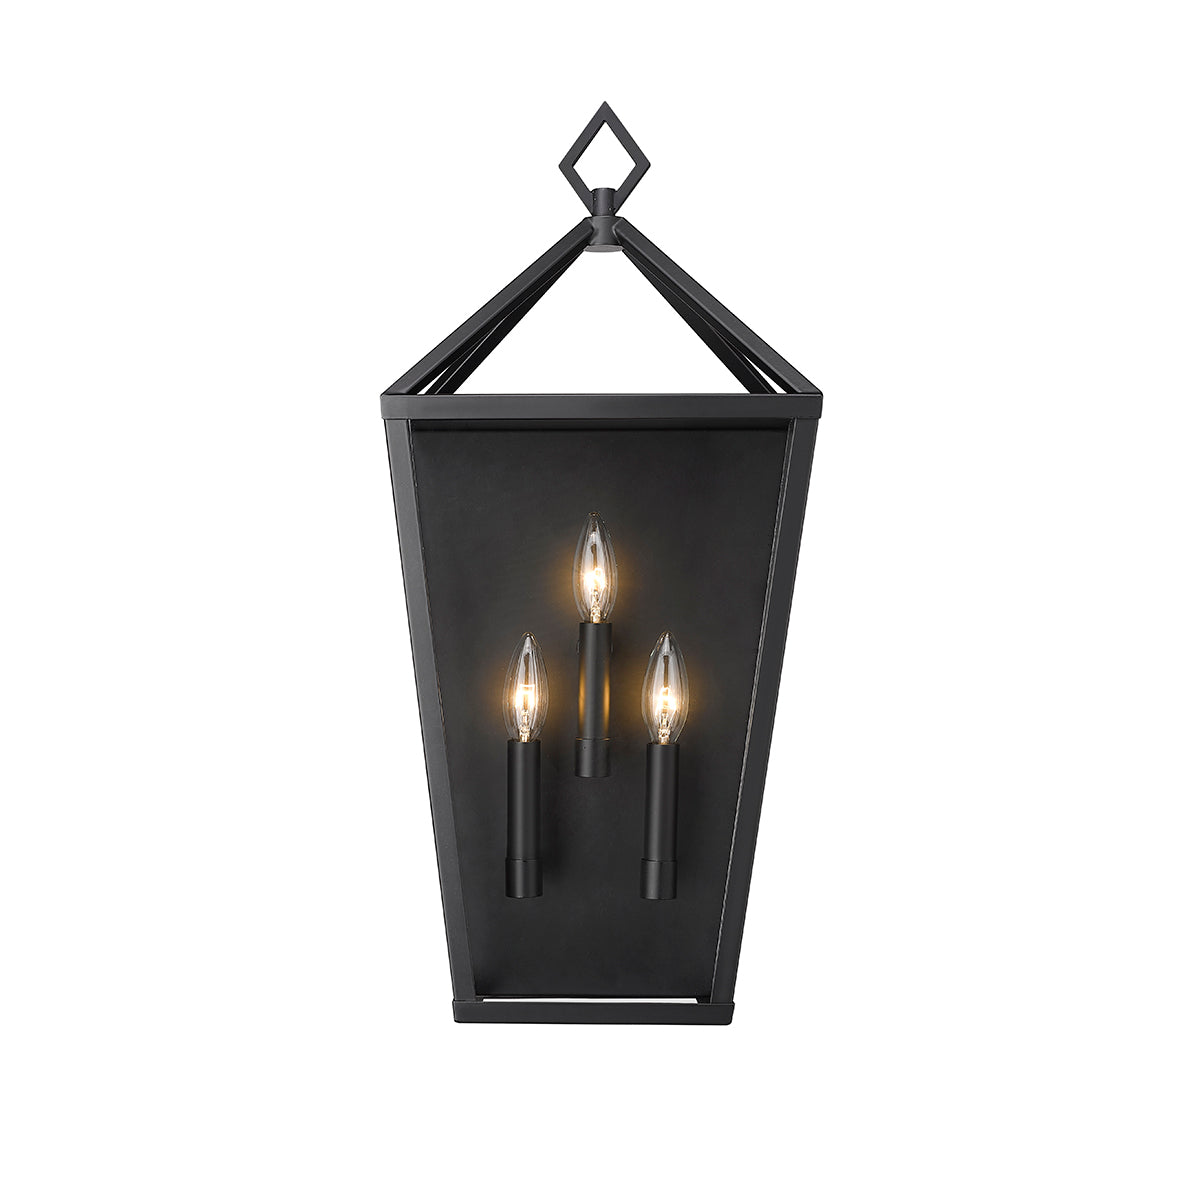 Millennium Lighting 3 Light Outdoor Wall Sconce, Arnold Collection, Powder Coat Black Finish